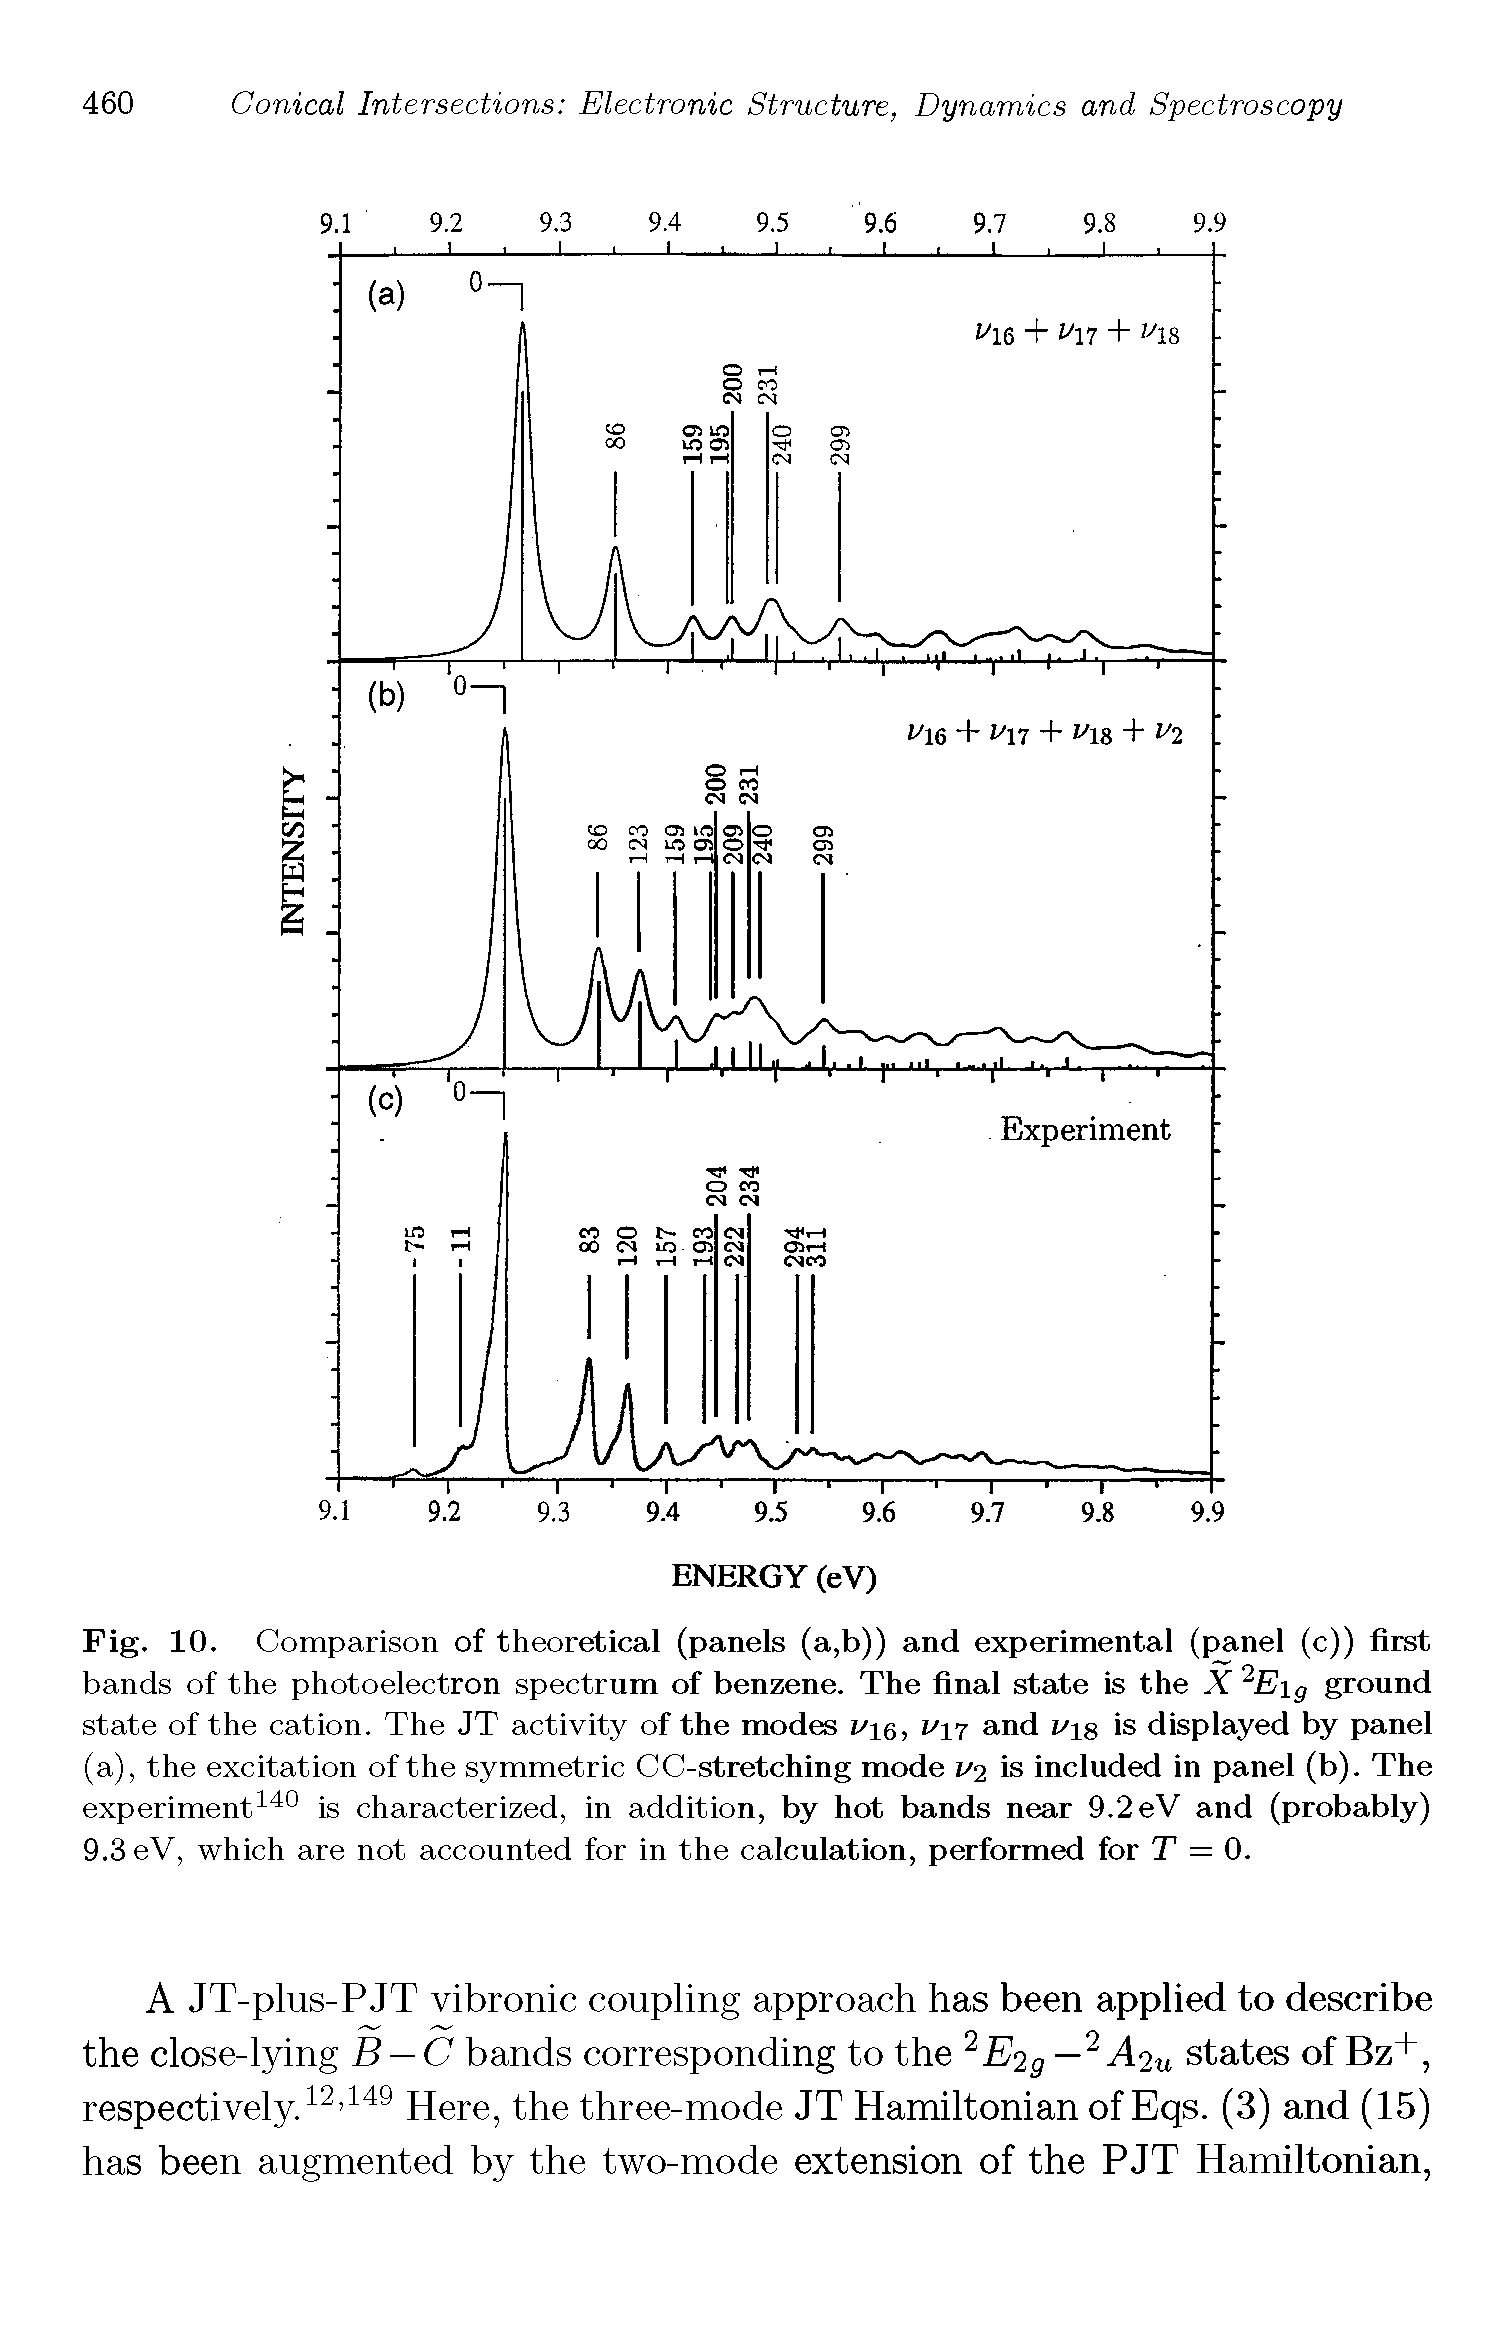 Fig. 10. Comparison of theoretical (panels (a,b)) and experimental (j nel (c)) first bands of the photoelectron spectrum of benzene. The final state is the X Eig ground state of the cation. The JT activity of the modes i/i6, 1 17 and i/is is displayed by panel (a), the excitation of the symmetric CC-stretching mode 1/2 is included in panel (b). The...